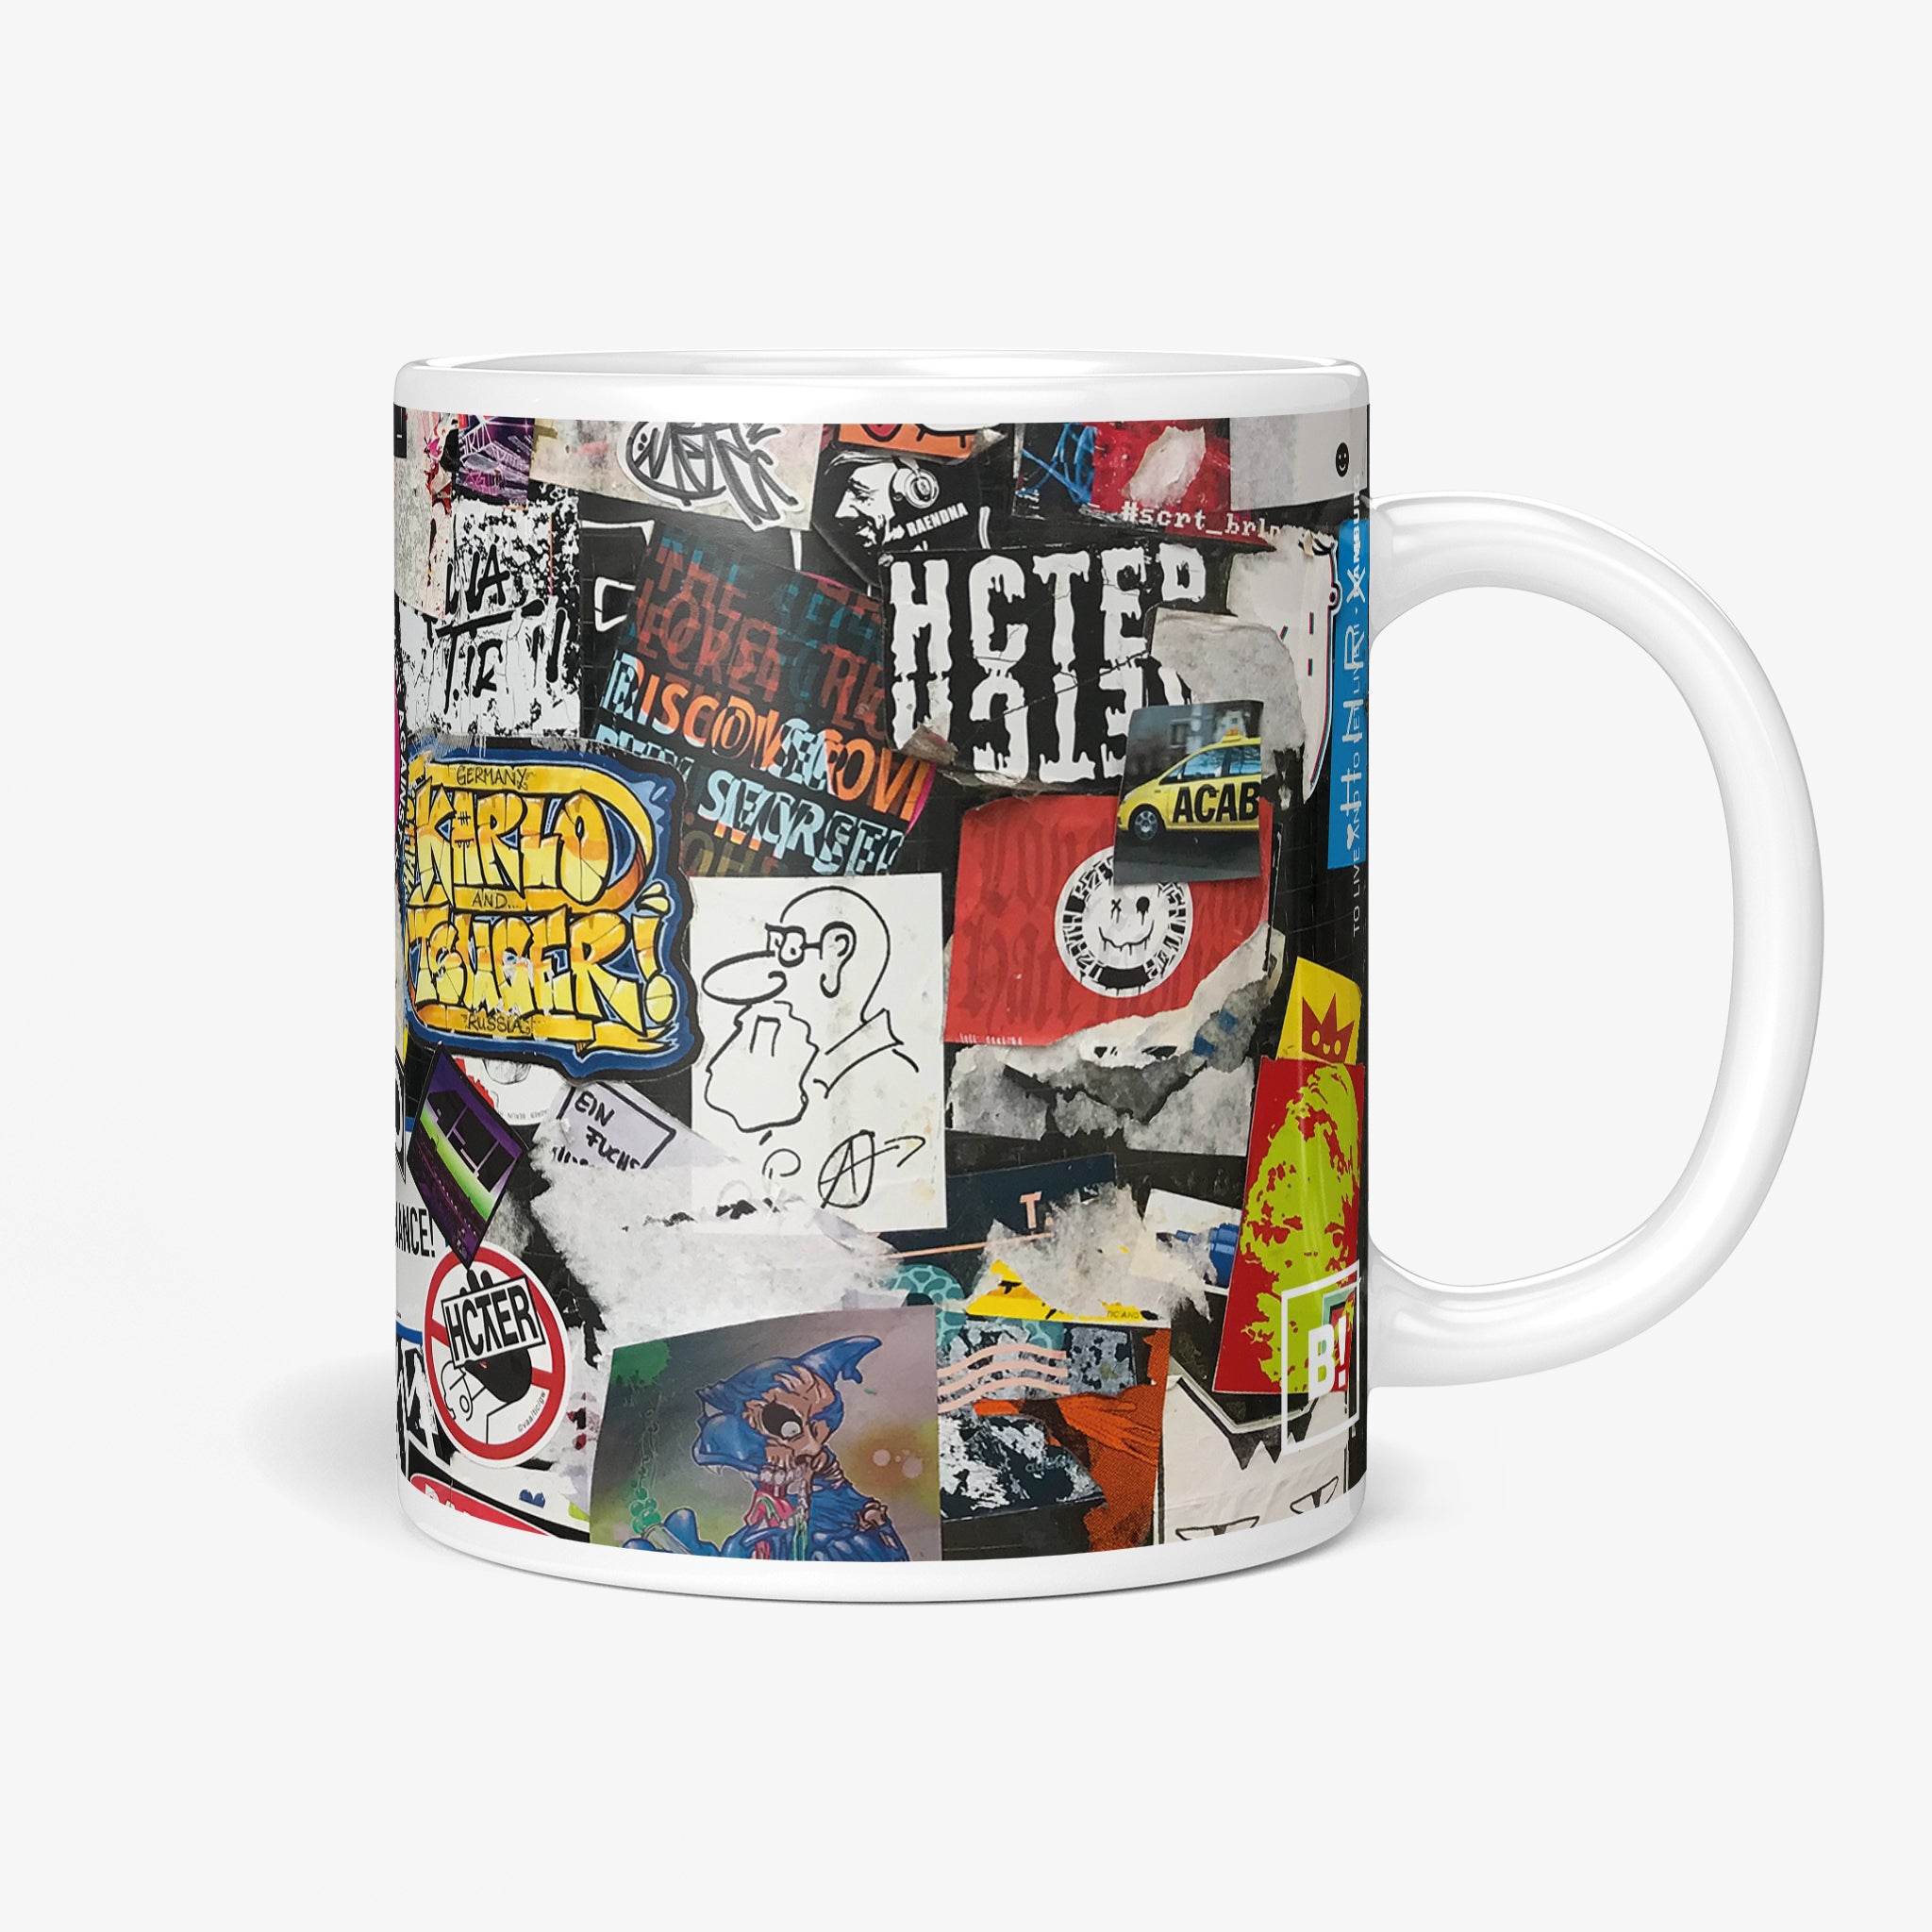 Be inspired by our Urban Art Coffee Mug – To Live And Let Live - No2 from Hamburg. Featuring a 11oz size with the handle on the right. The urban billboard design lends an authentic urban feel to the mug, making it resemble a piece of street art itself.